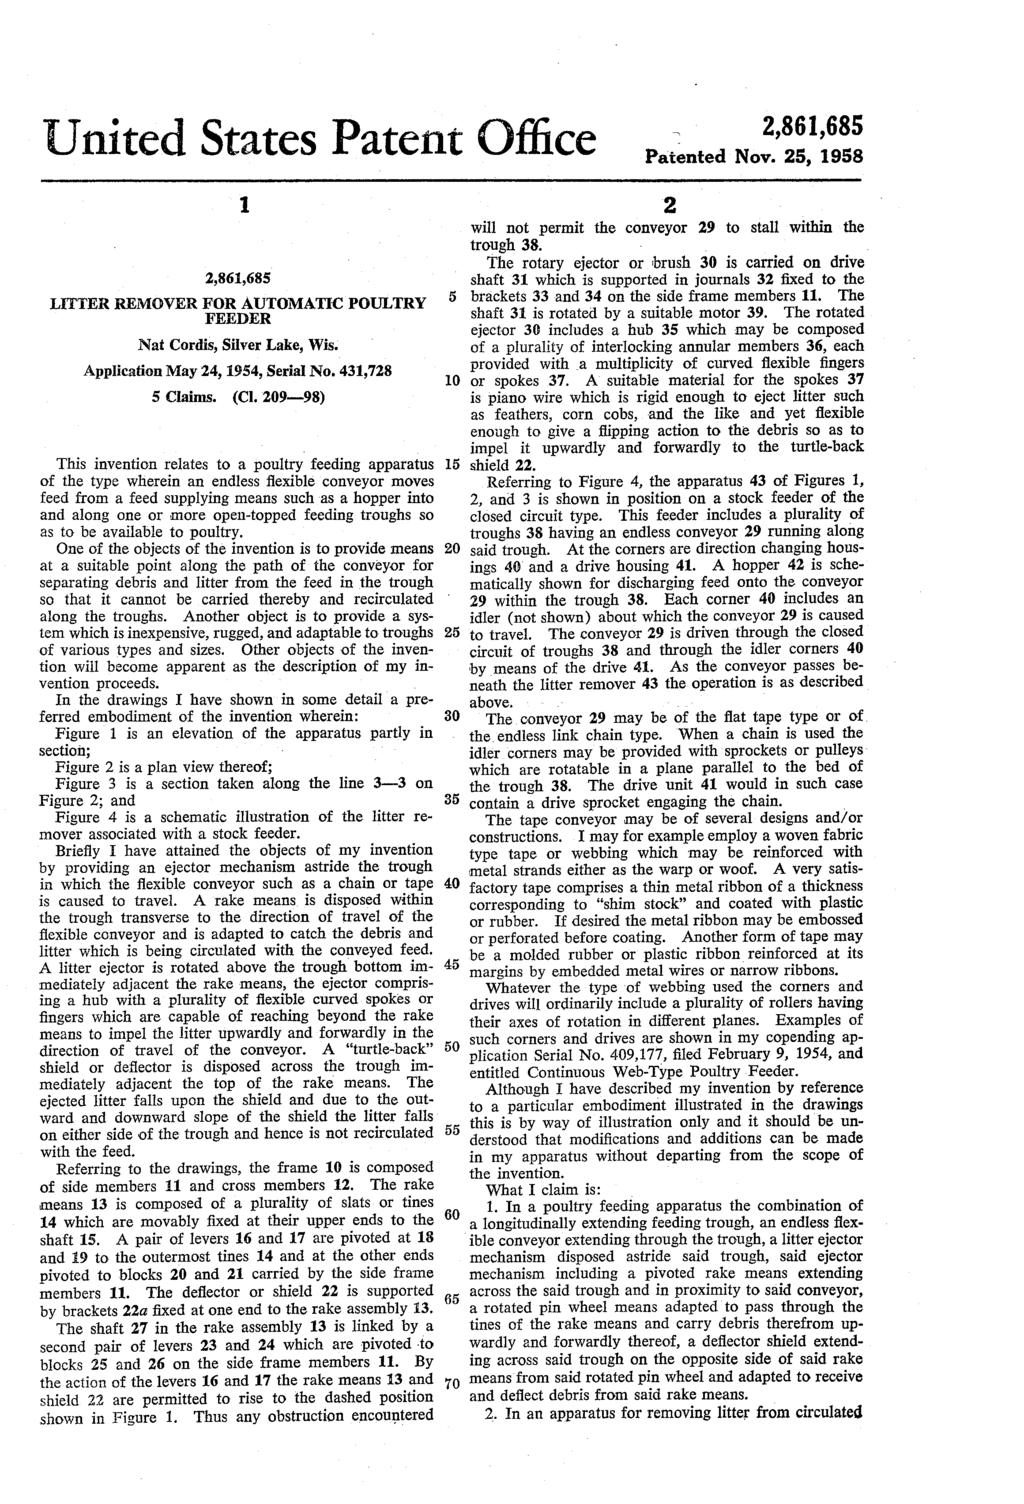 2,861,685 United States Patent Office E. 2,861,685 LTTER REMOVER FOR AUTOMATIC POULTRY FEEDER Nat Cordis, Silver Lake, Wis. Application May 24, 1954, Serial No. 431,728 5 Claims. (Cl.